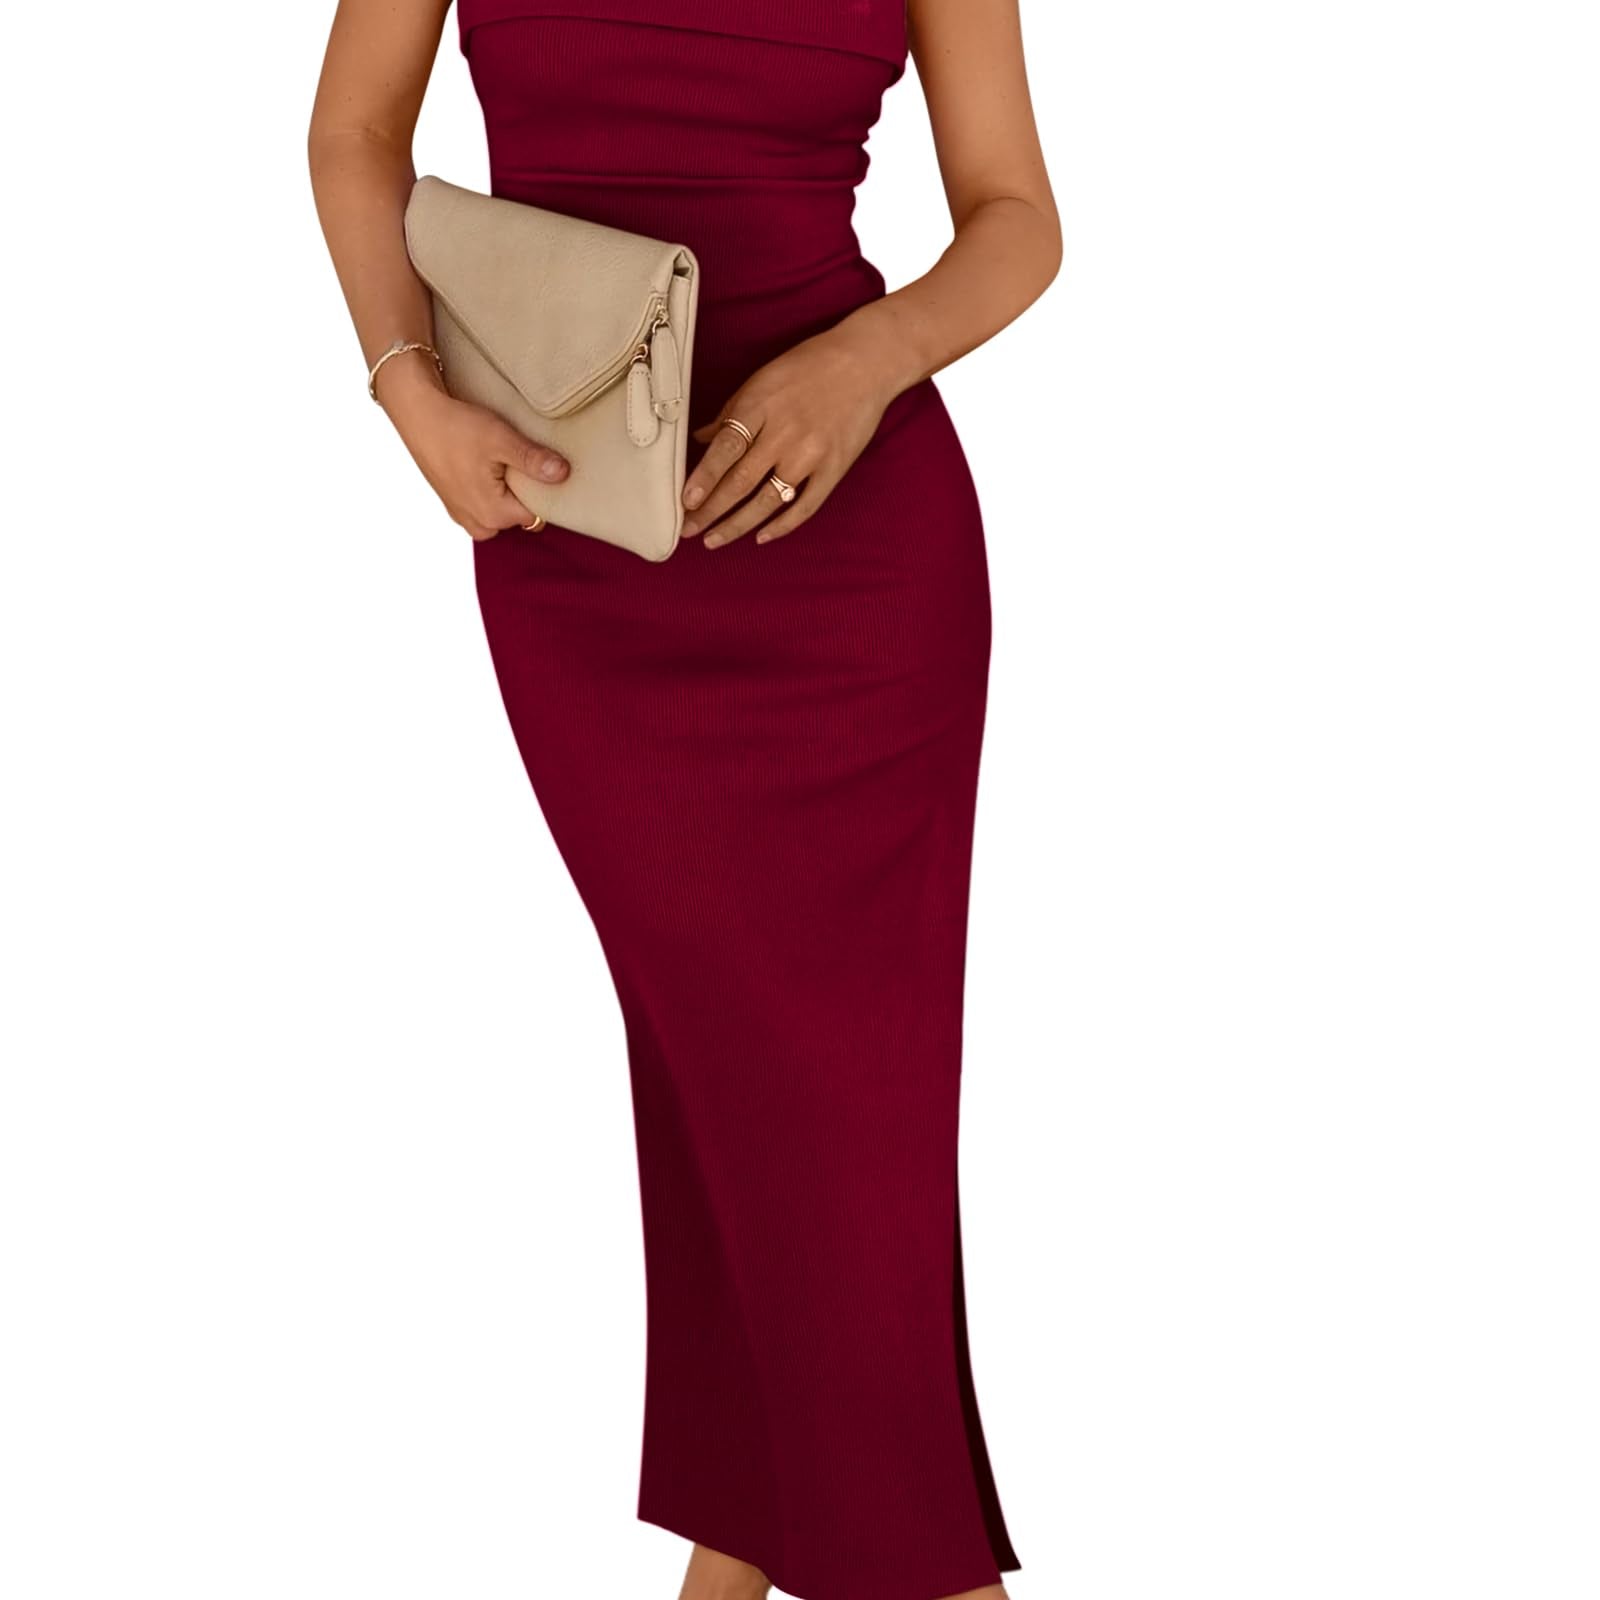 PRETTYGARDEN Women's Summer Bodycon Maxi Tube Dress Ribbed Strapless Side Slit Long Going Out Casual Elegant Party Dresses